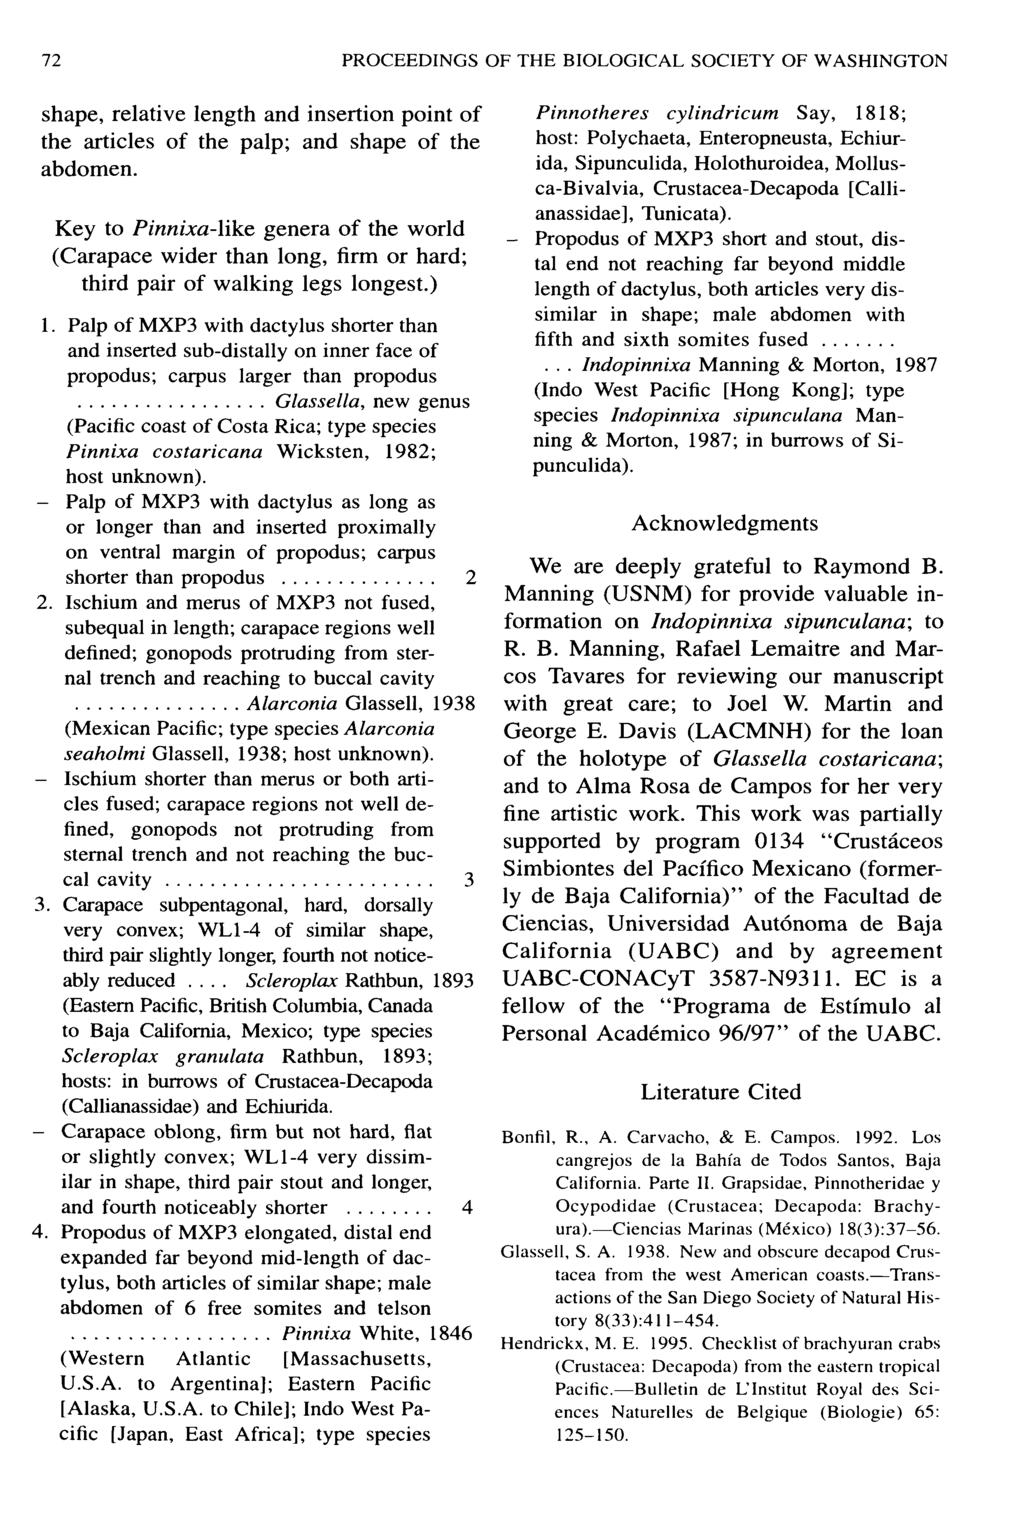 72 PROCEEDINGS OF THE BIOLOGICAL SOCIETY OF WASHINGTON shape, relative length and insertion point of the articles of the palp; and shape of the abdomen.